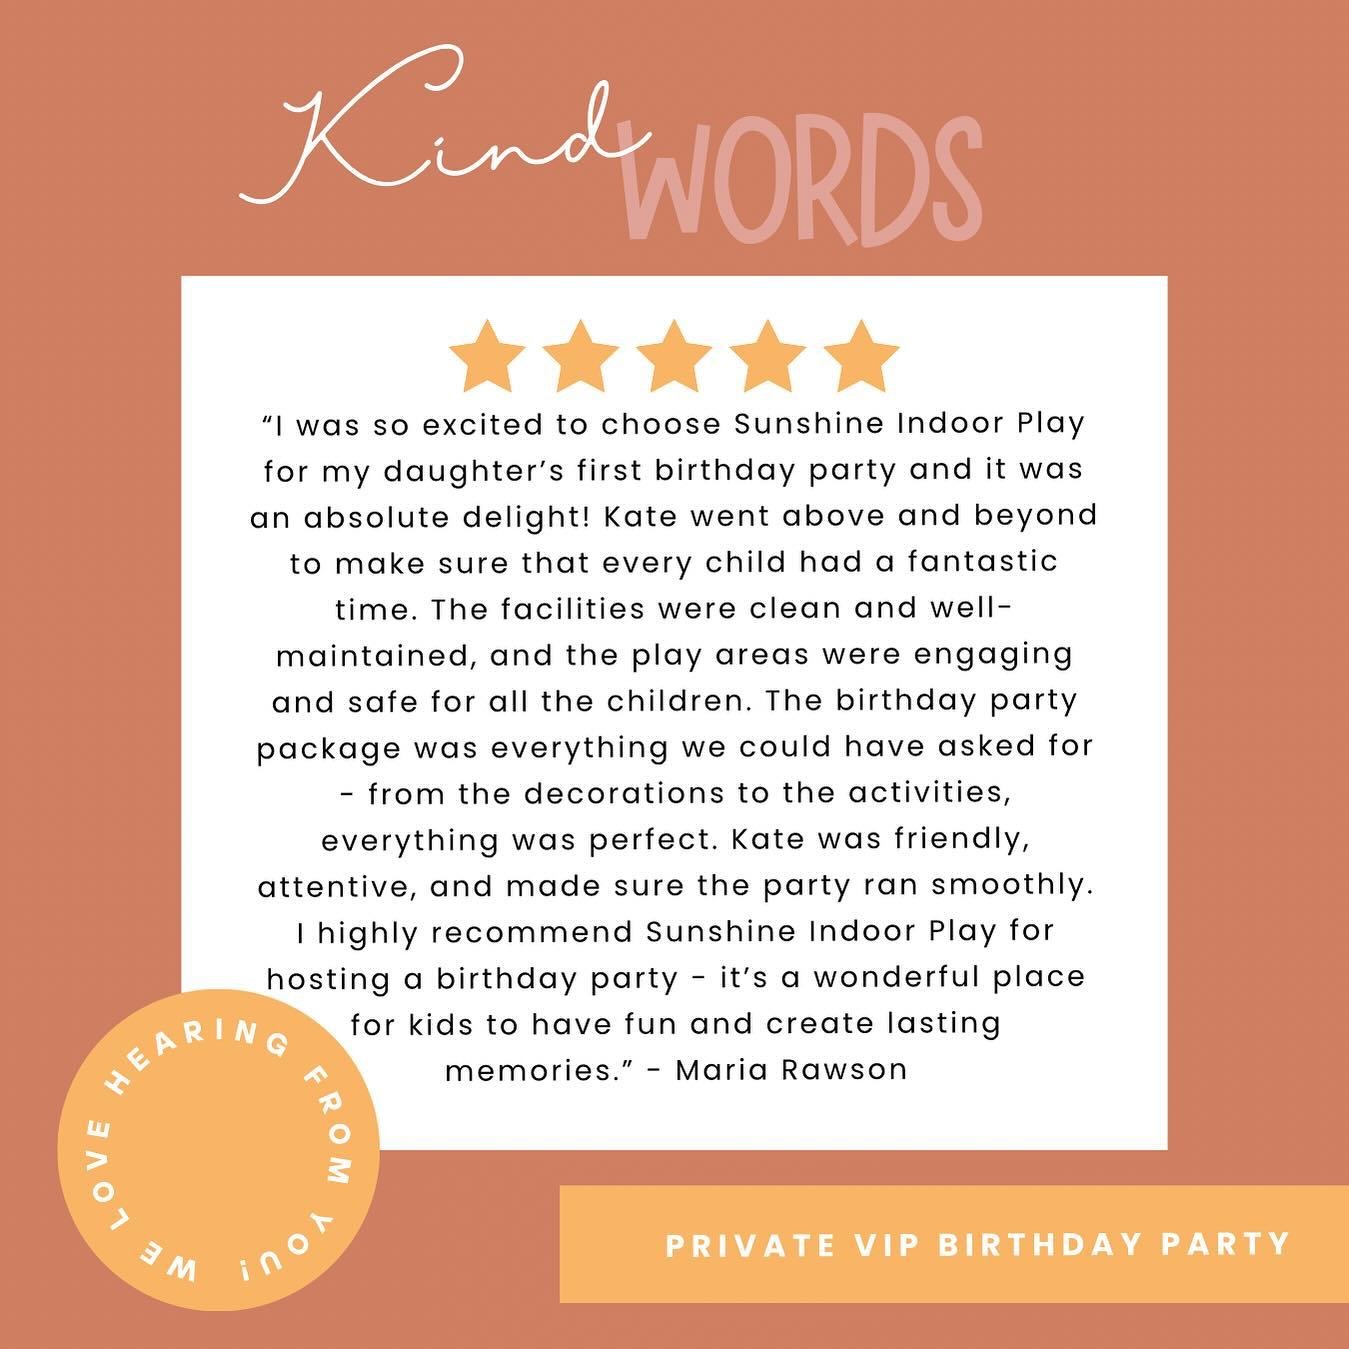 Good reviews are like little love notes to small businesses. I loved reading this sweet review after celebrating their daughter&rsquo;s 1st birthday party at Sunshine! ☀️ 🎉 

The weather is looking to be over 100 degrees next week! Summer parties ar